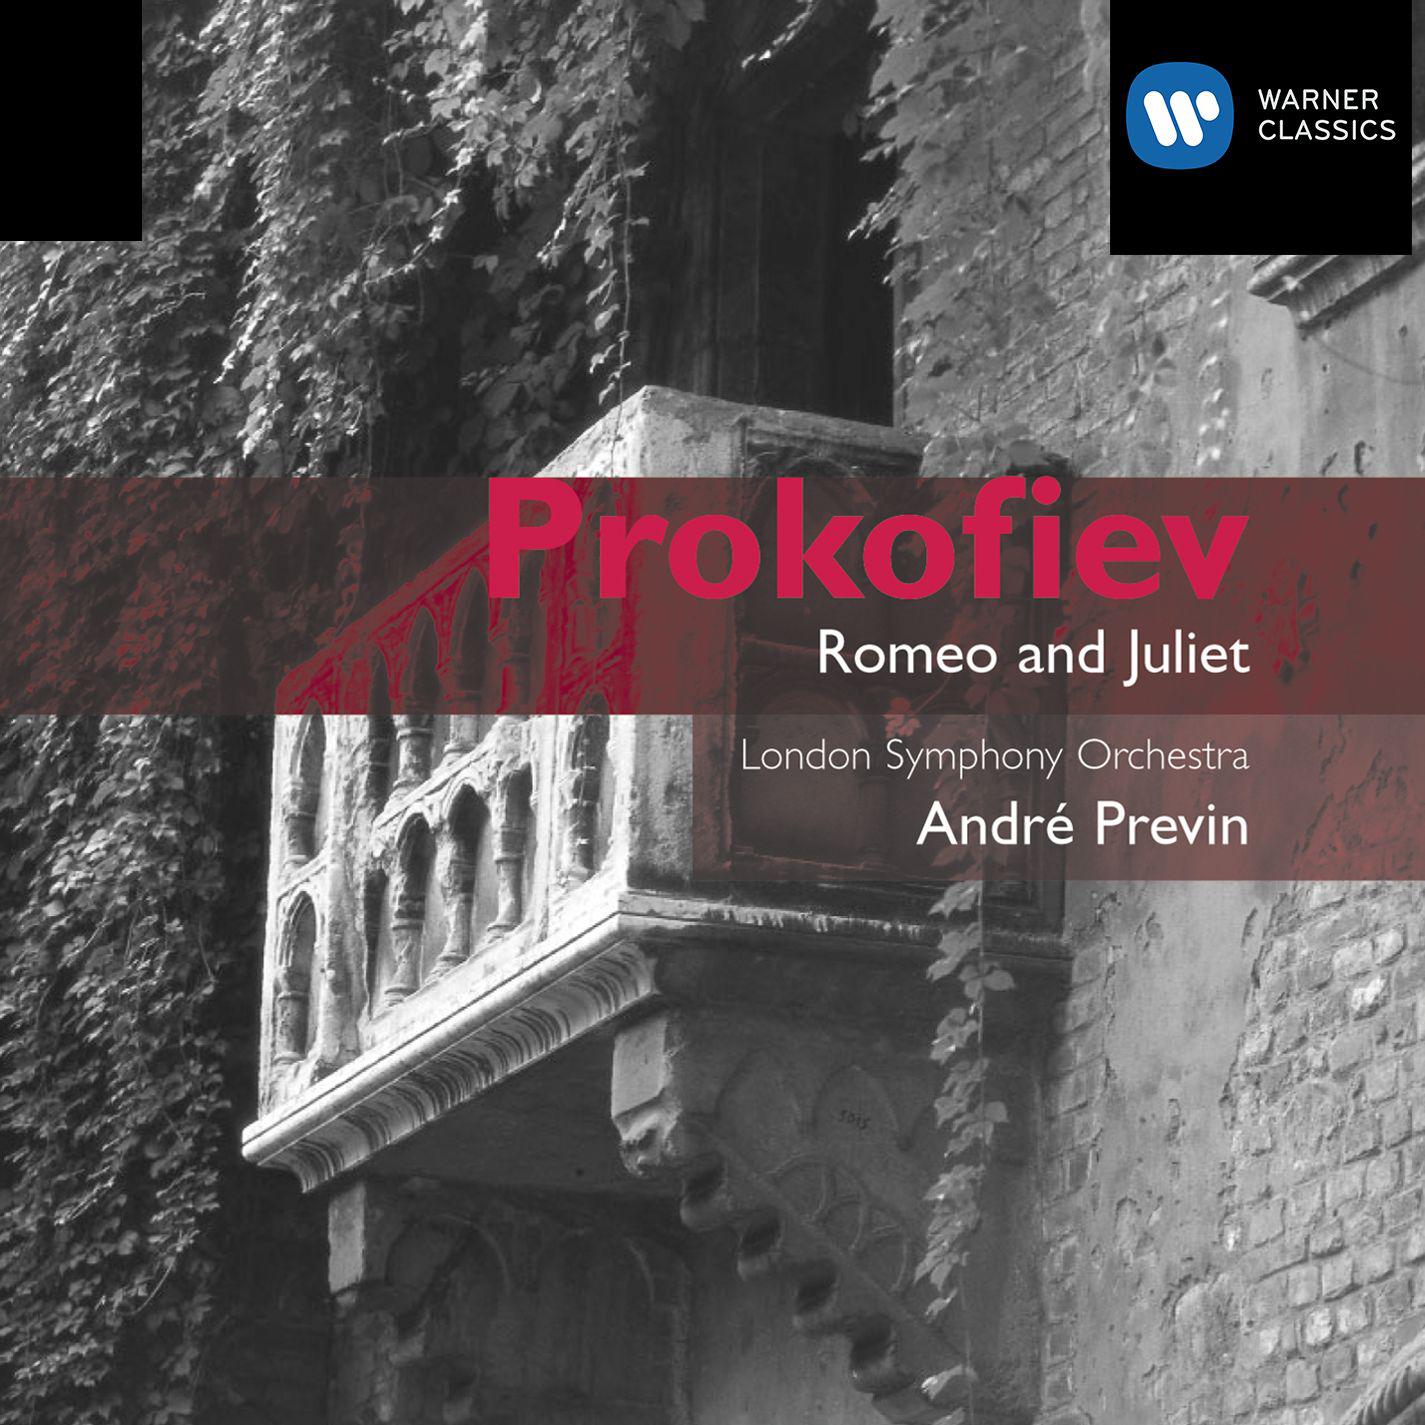 Romeo and Juliet (Complete Ballet), Op. 64, Act 2:No. 30, The People continue to make Merry